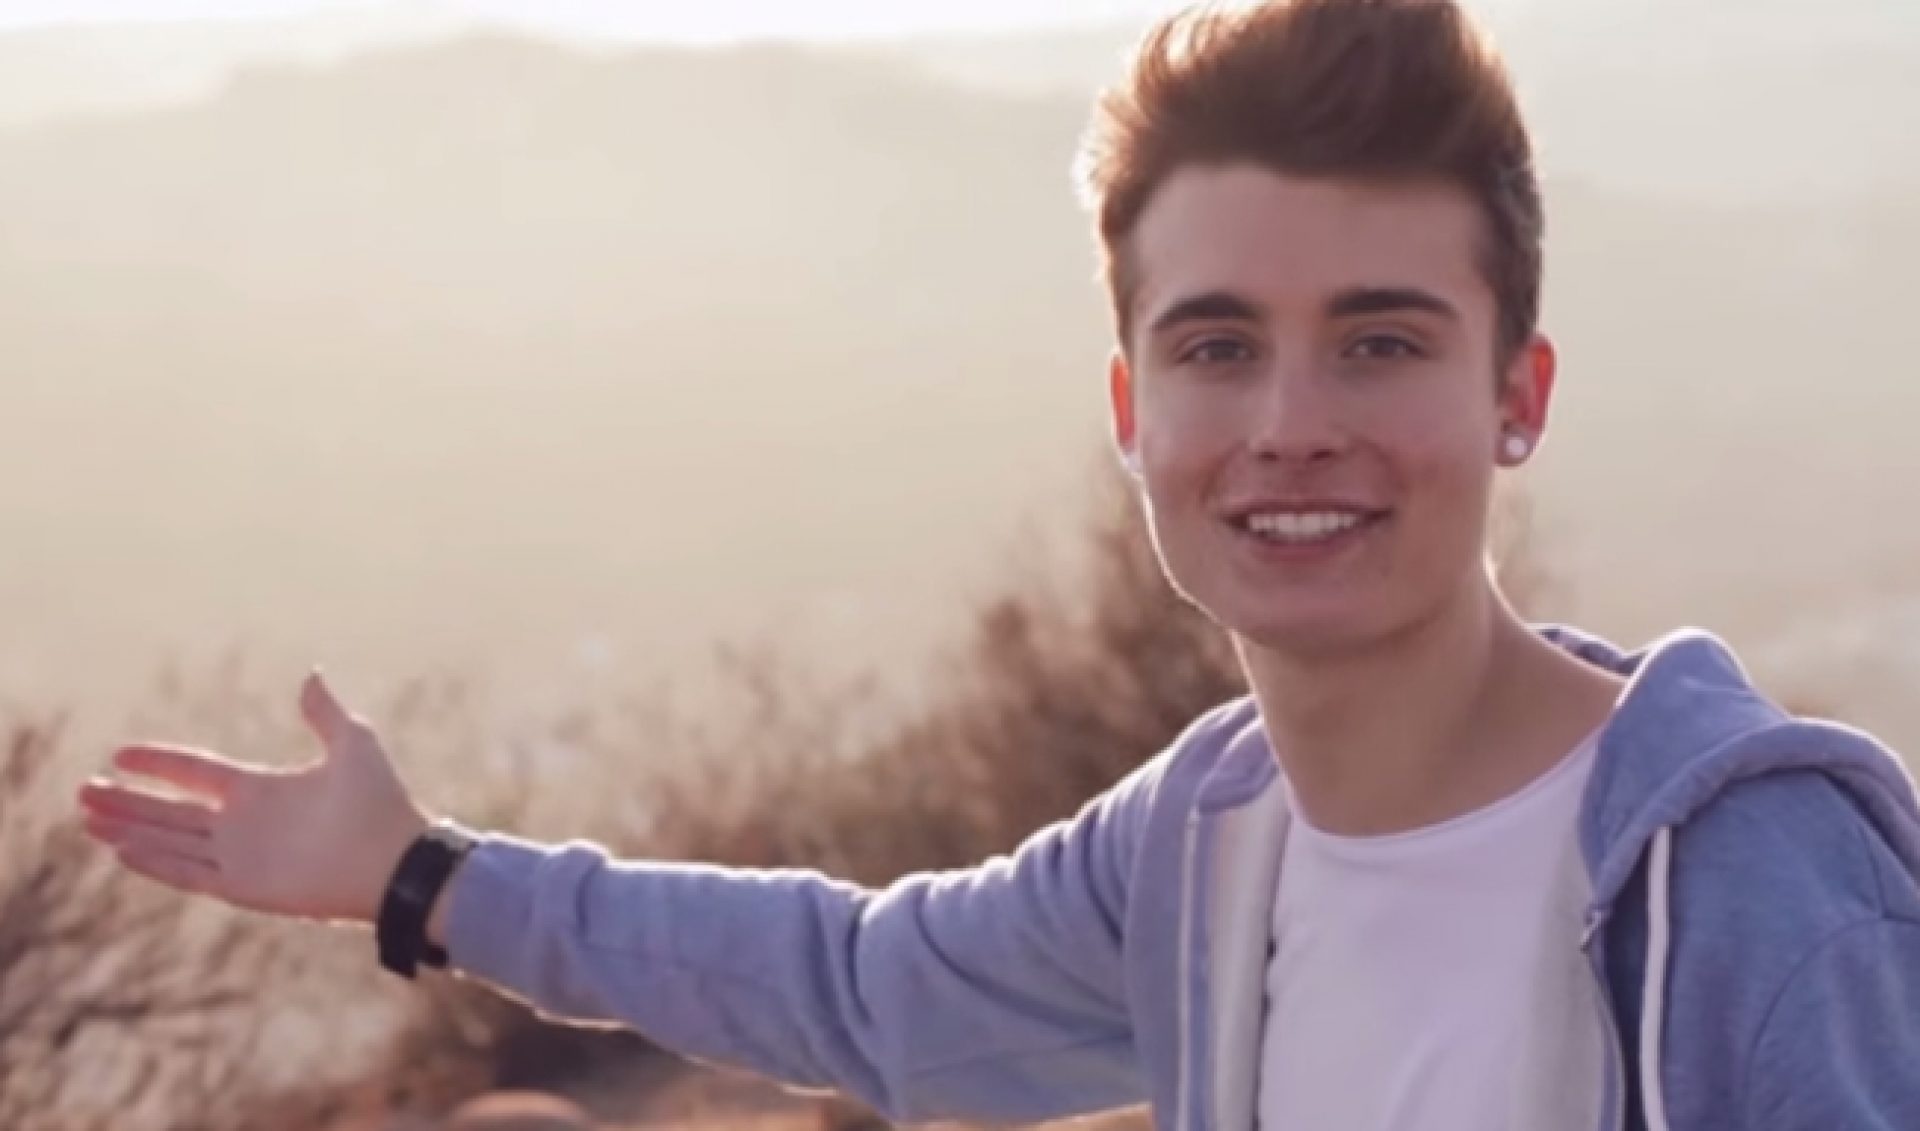 YouTube Millionaires: Chris Collins “Was A Very Shy Kid”